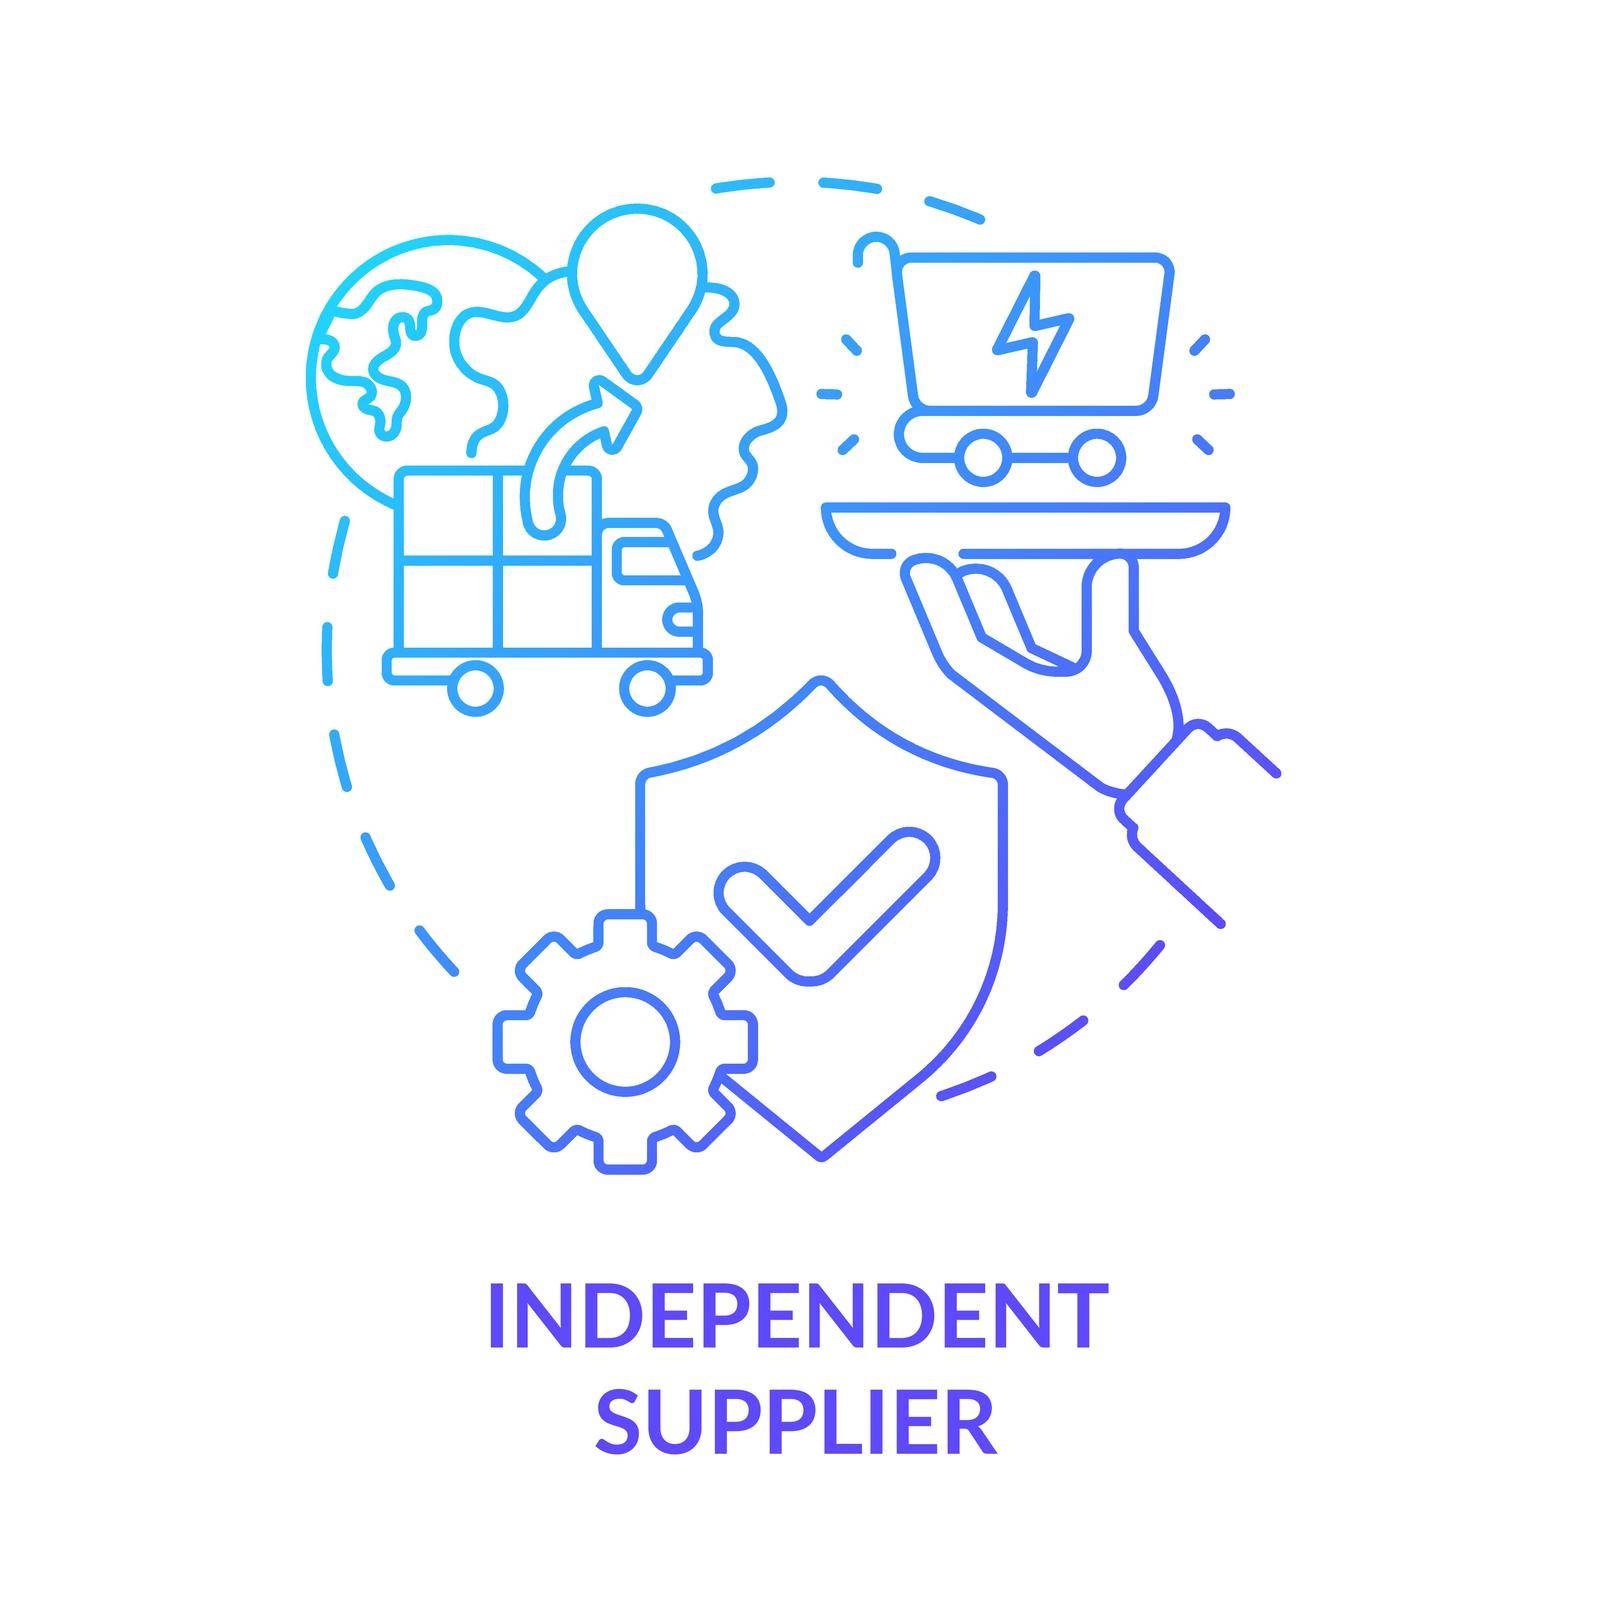 Independent supplier blue gradient concept icon by bsd